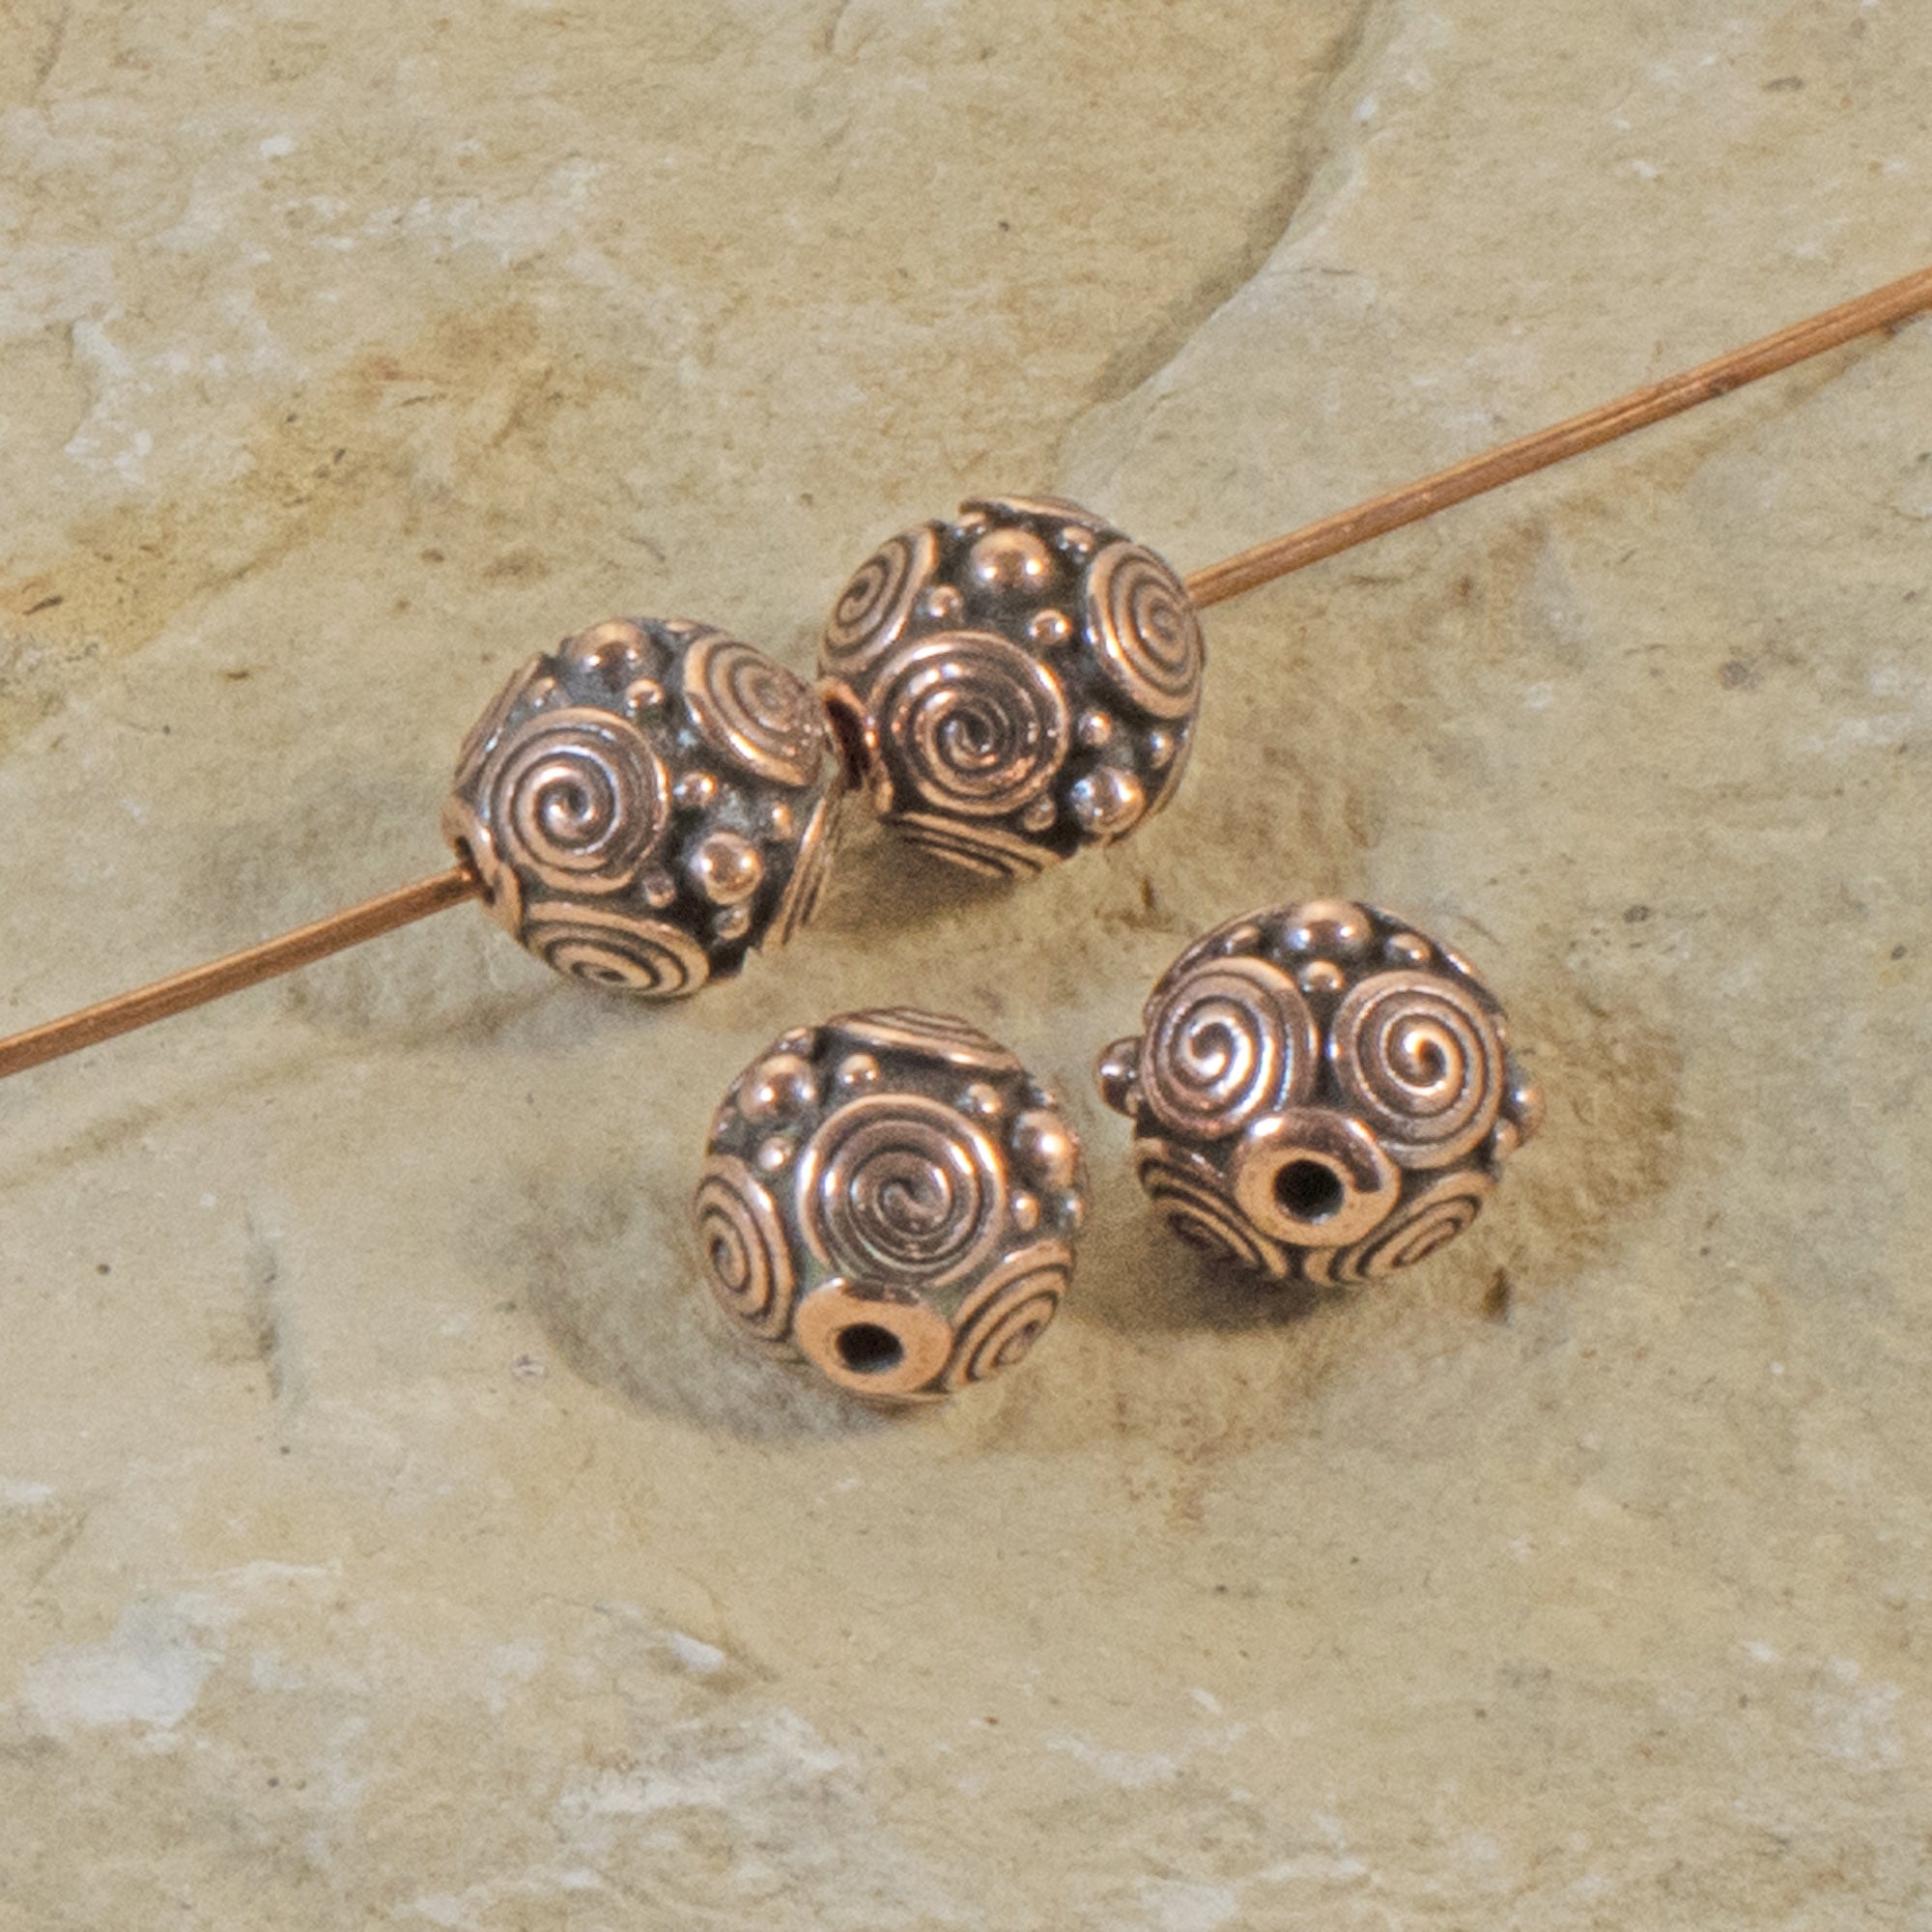 5 Large Copper Spiral Pinch Bail, Tierracast Jewelry Bails for